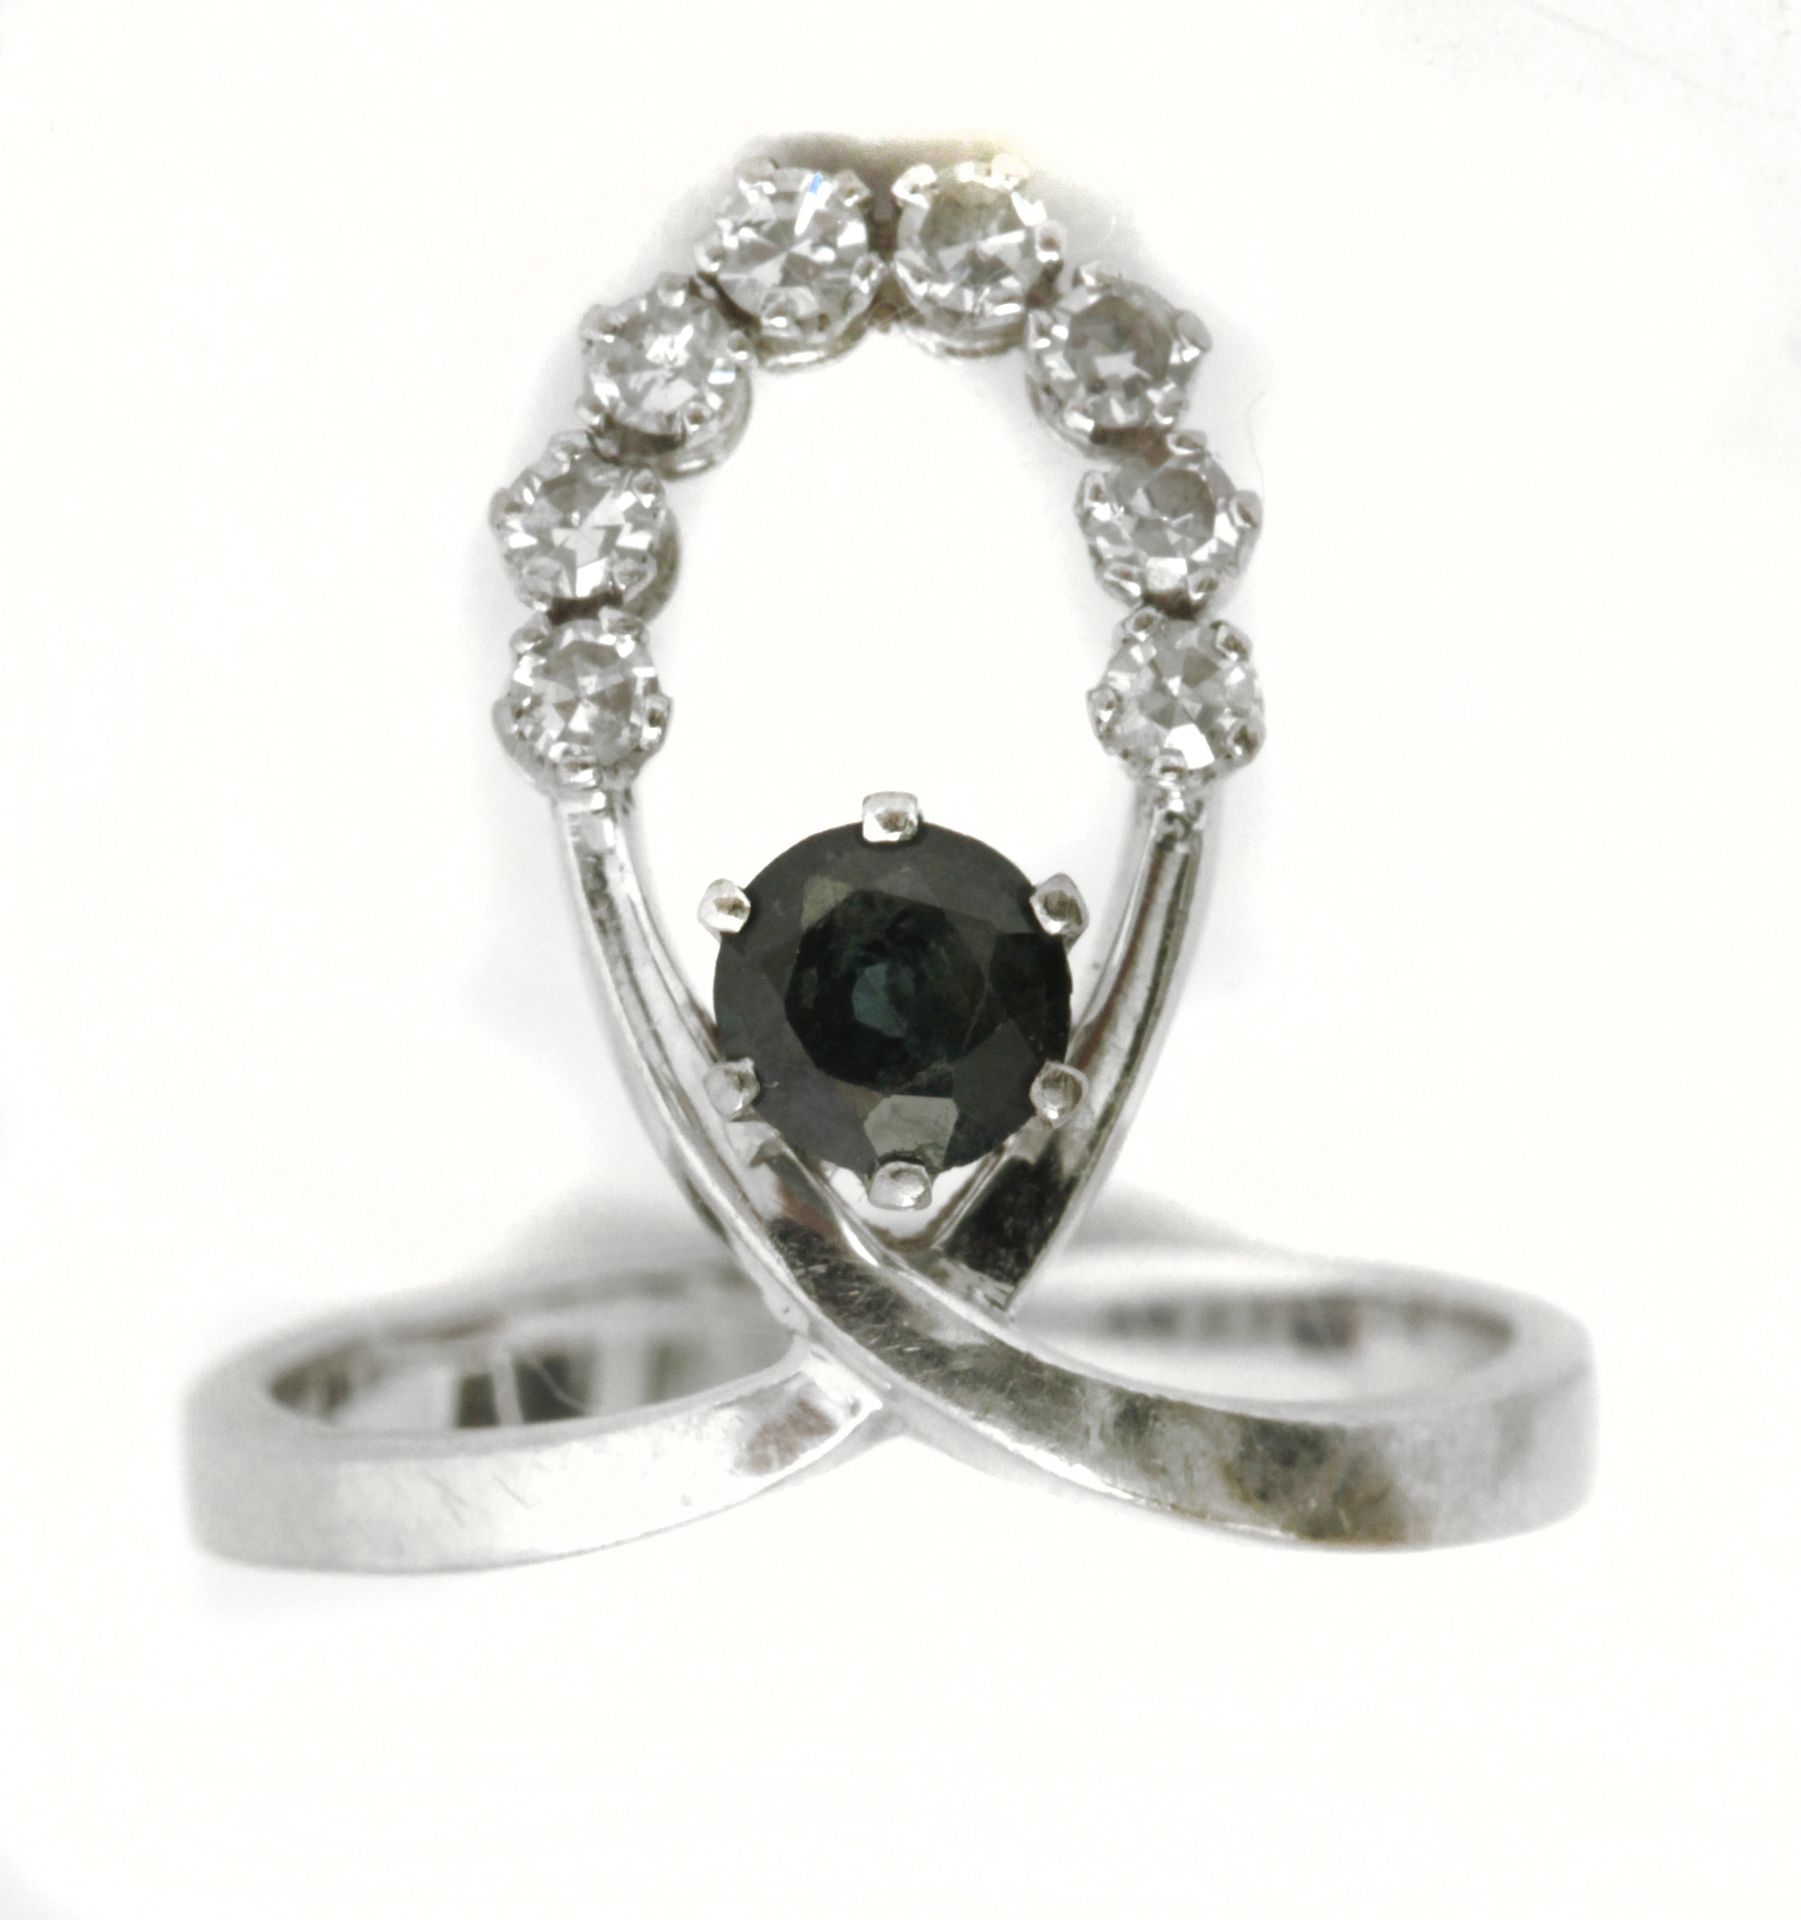 A sapphire and diamond ring circa 1960-1969 with an 18k. white gold setting